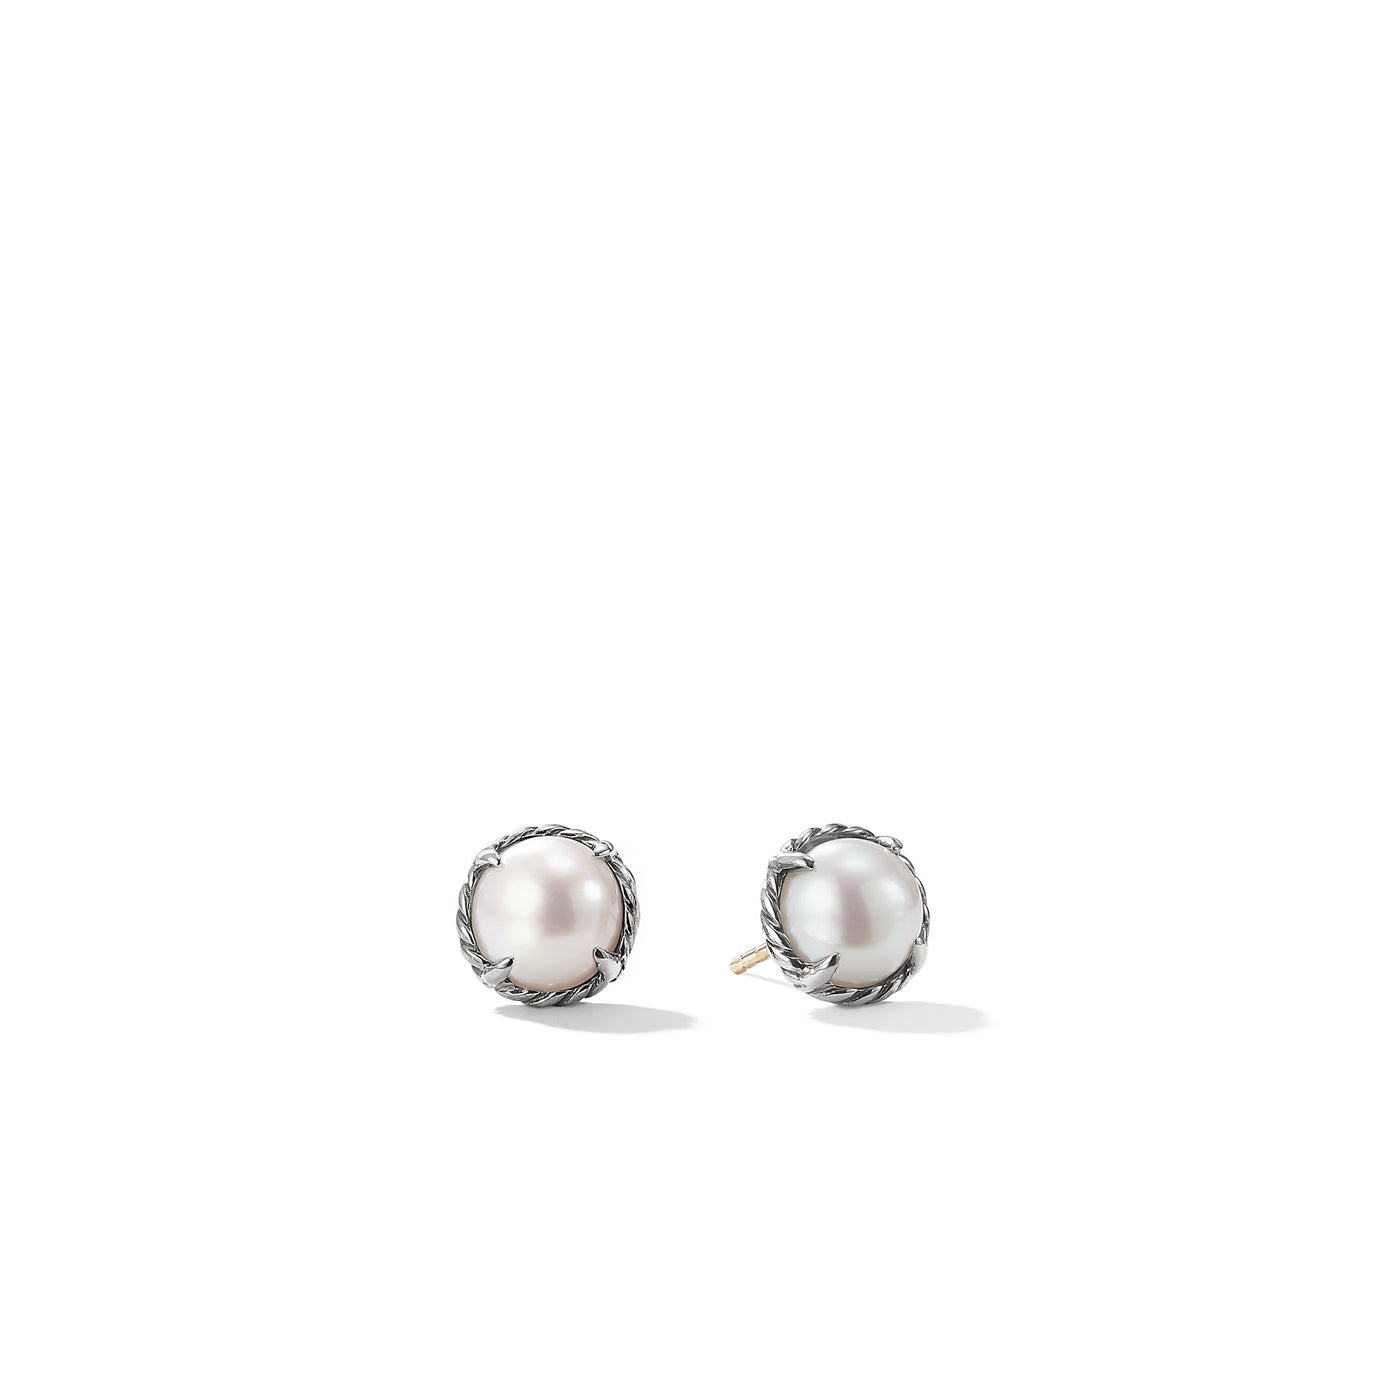 Petite Chatelaine® Stud Earrings in Sterling Silver with Pearls\, 8mm